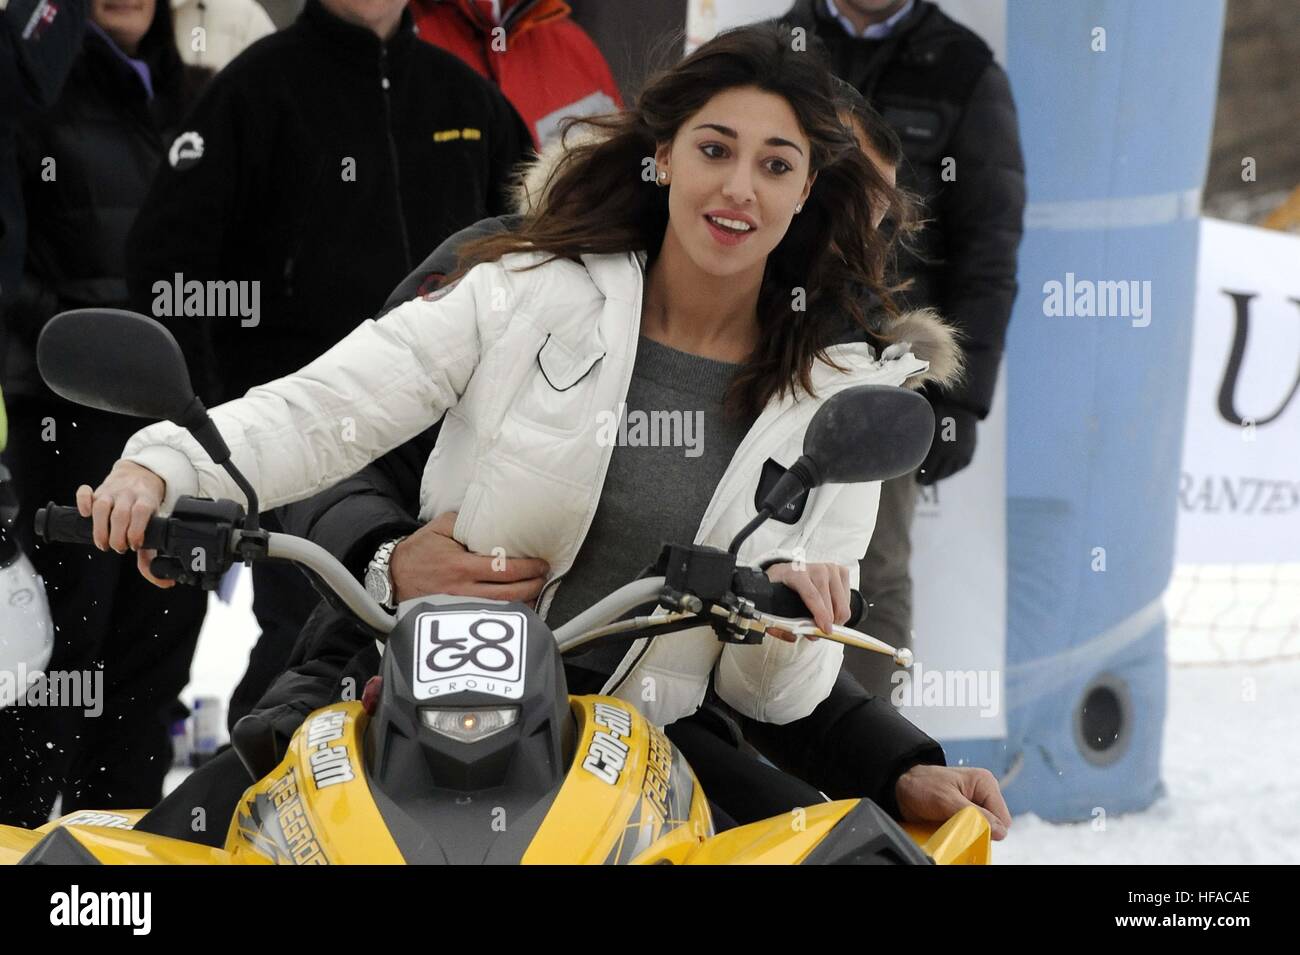 Belén Rodríguez enjoying a holiday on the snow in Cortina d'Ampezzo  Featuring: Belén Rodríguez, Belen Rodriguez Where: Cortina d'Ampezzo, Italy When: 28 Dec 2009 Credit: IPA/WENN.com  **Only available for publication in UK, USA, Germany, Austria, Switzerland** Stock Photo